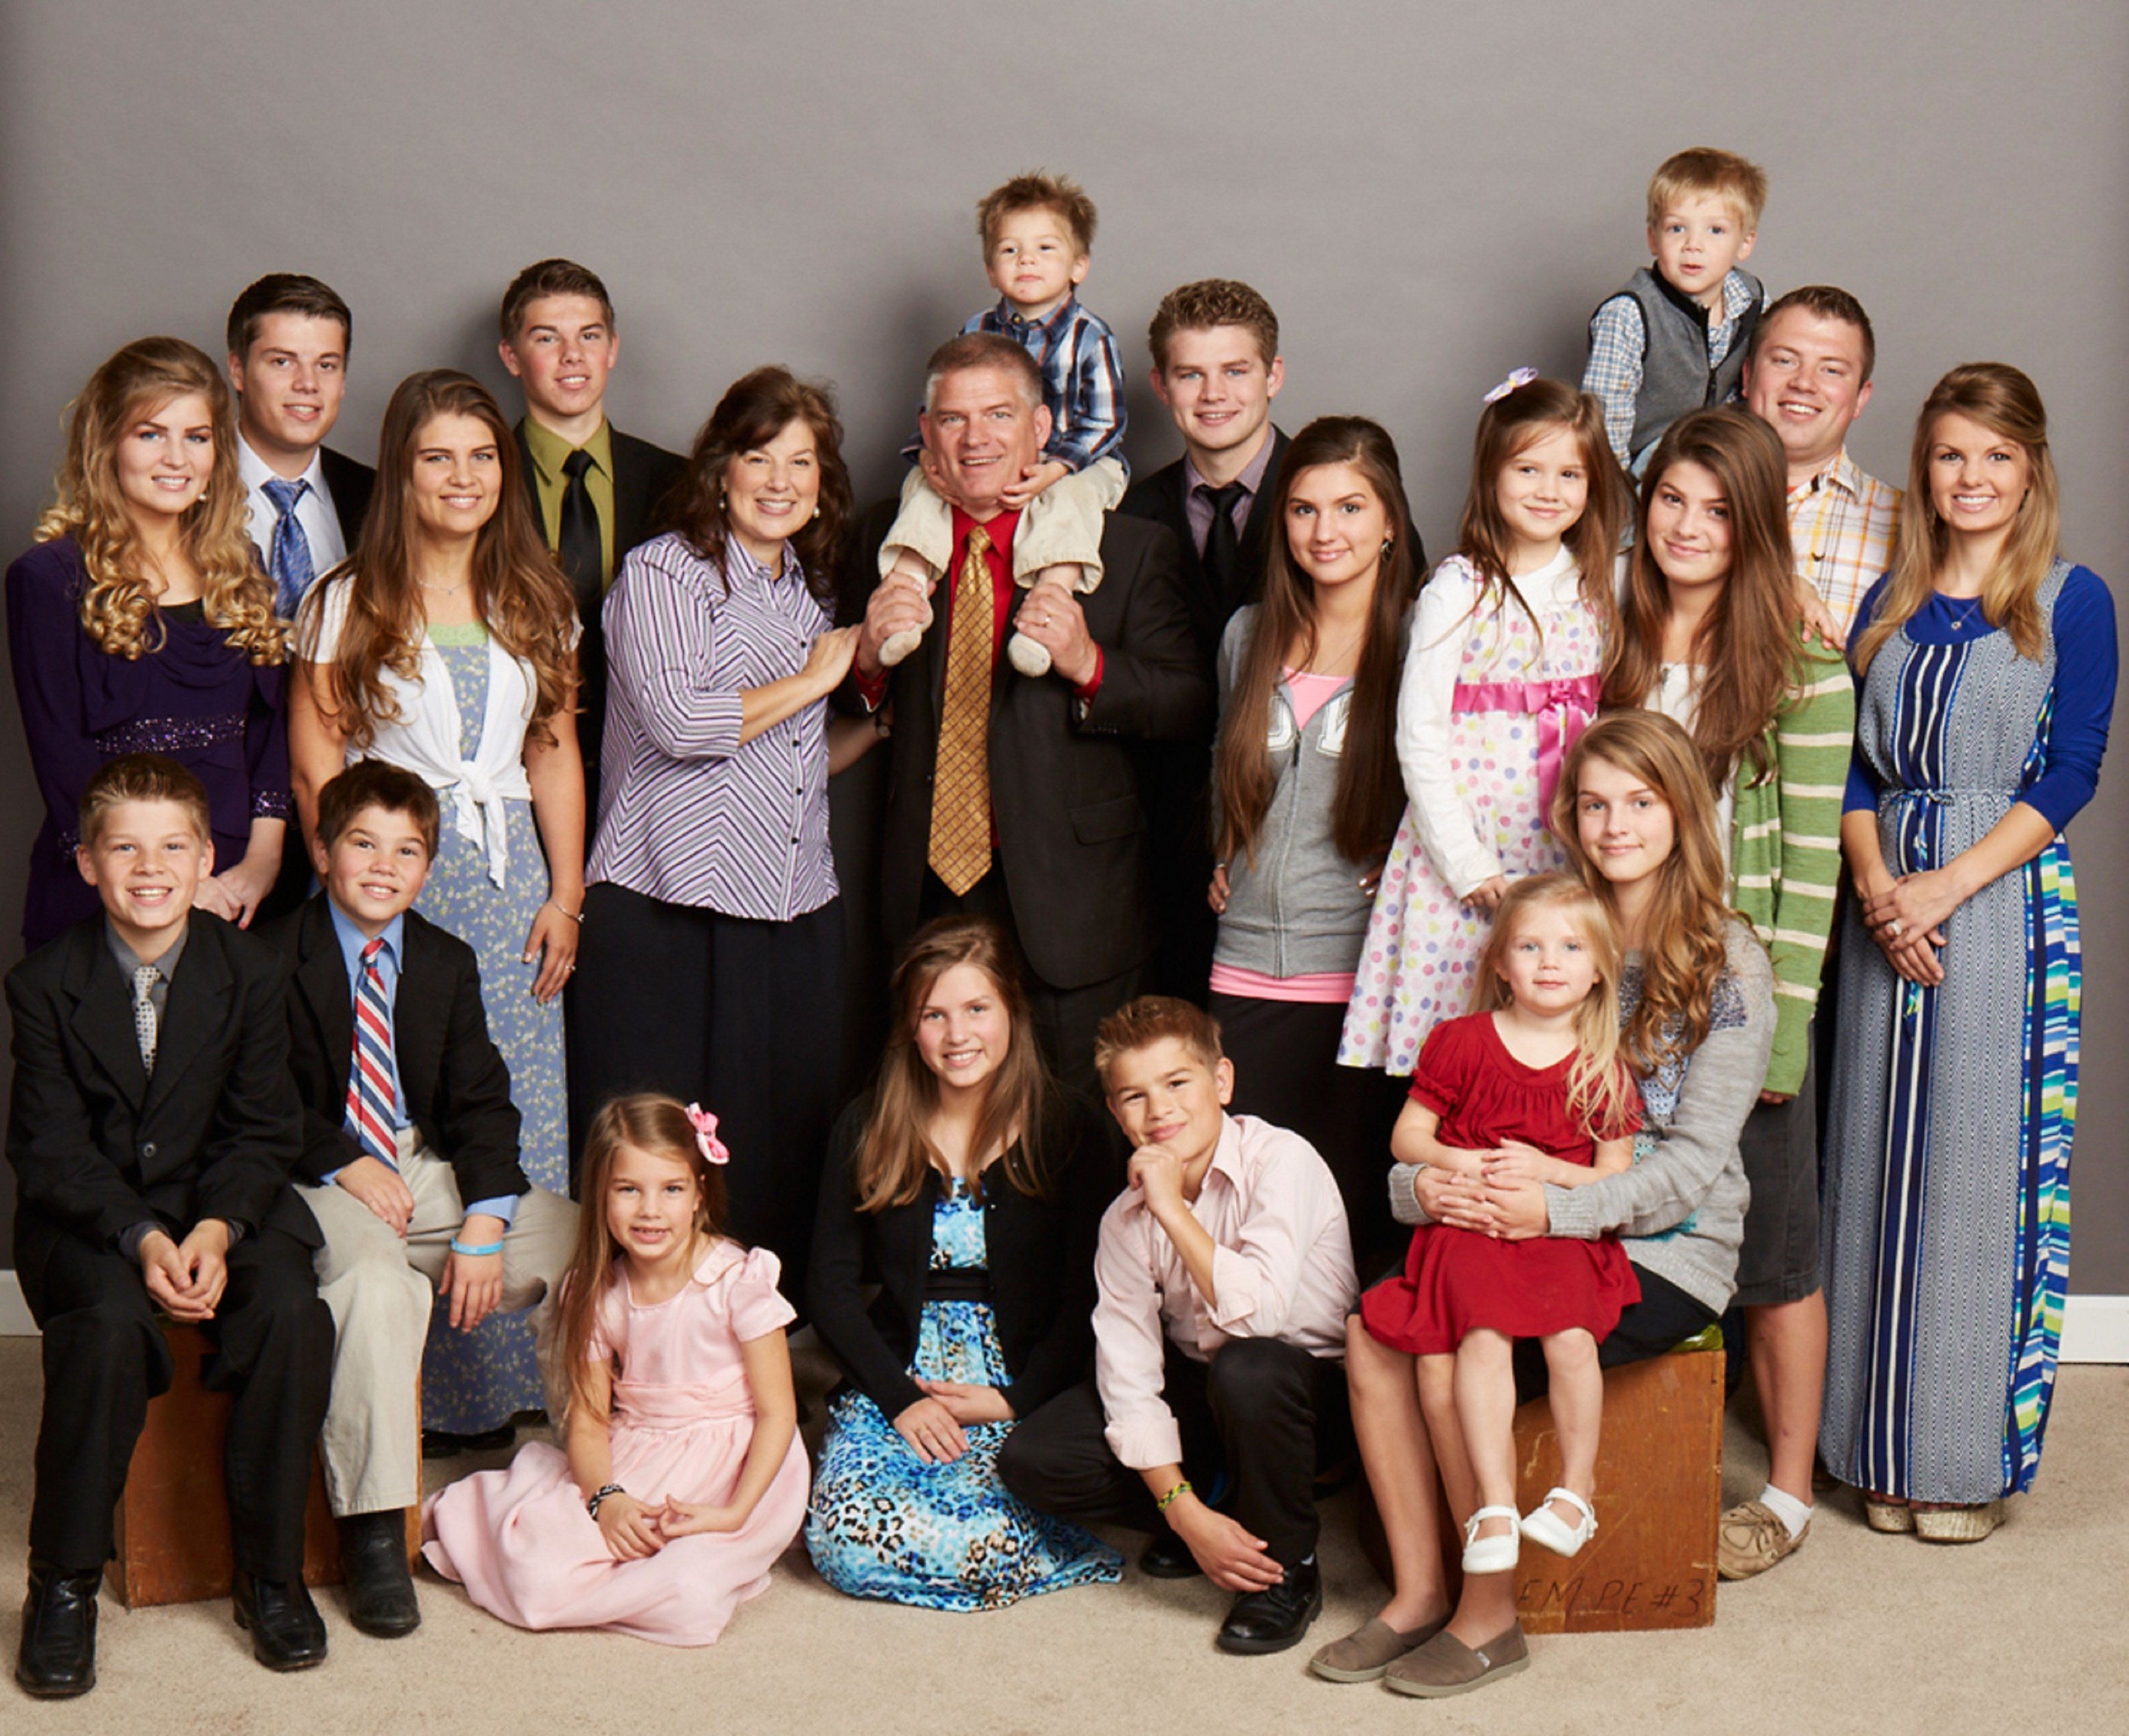 The Bates family smiles at the camera for a promotional photo for their reality TV show, 'Bringing Up Bates'